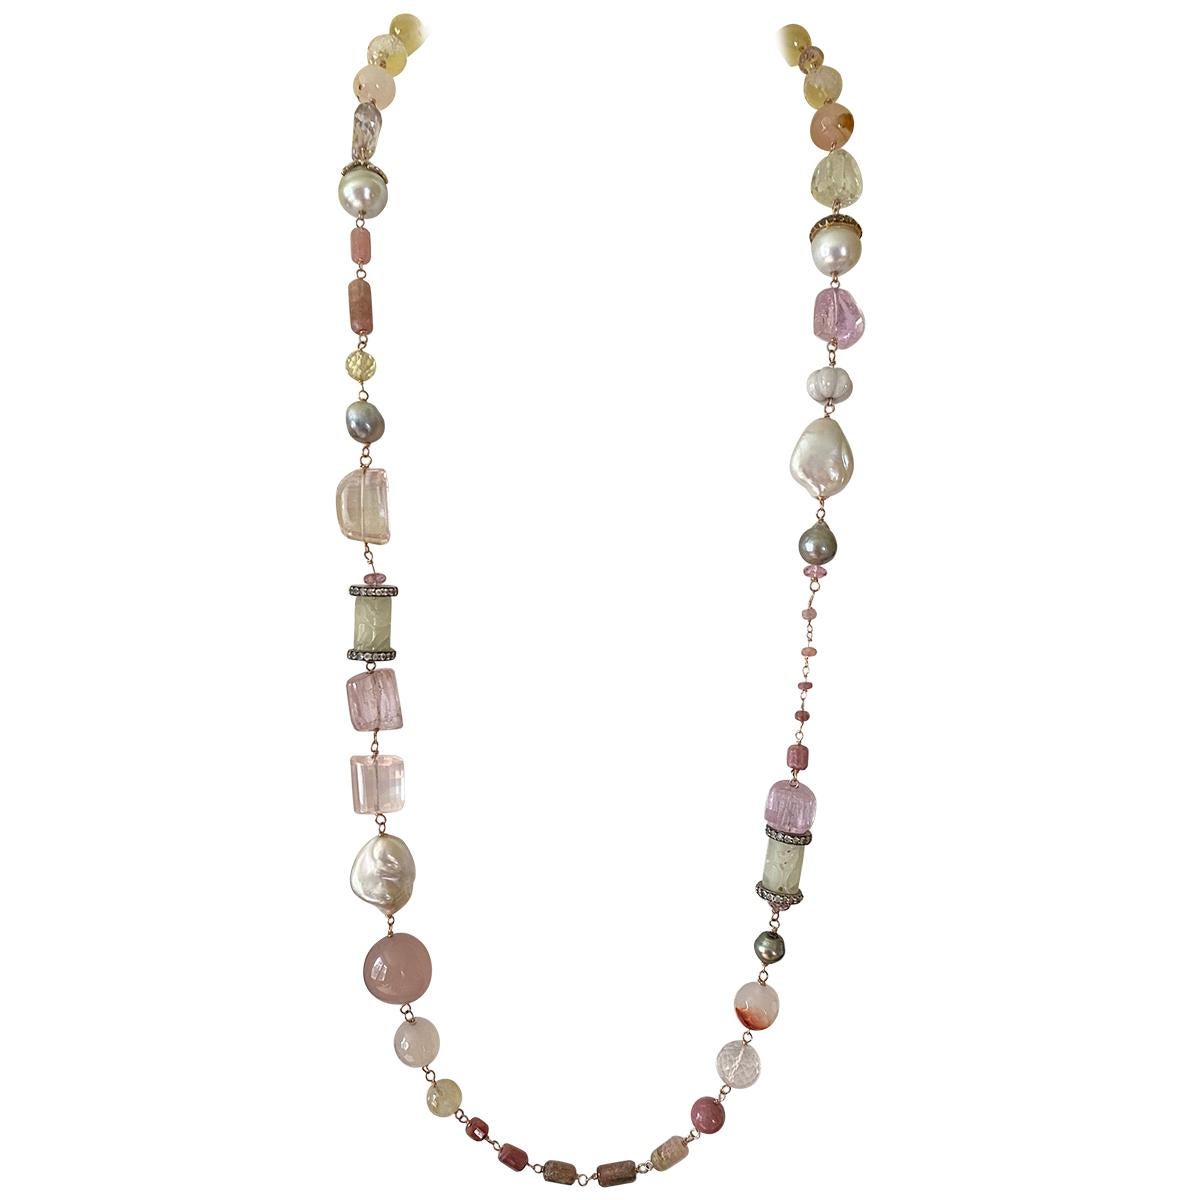 Statement Gem Necklace with South Sea and Tahitian Pearls in 18 Karat Rose Gold